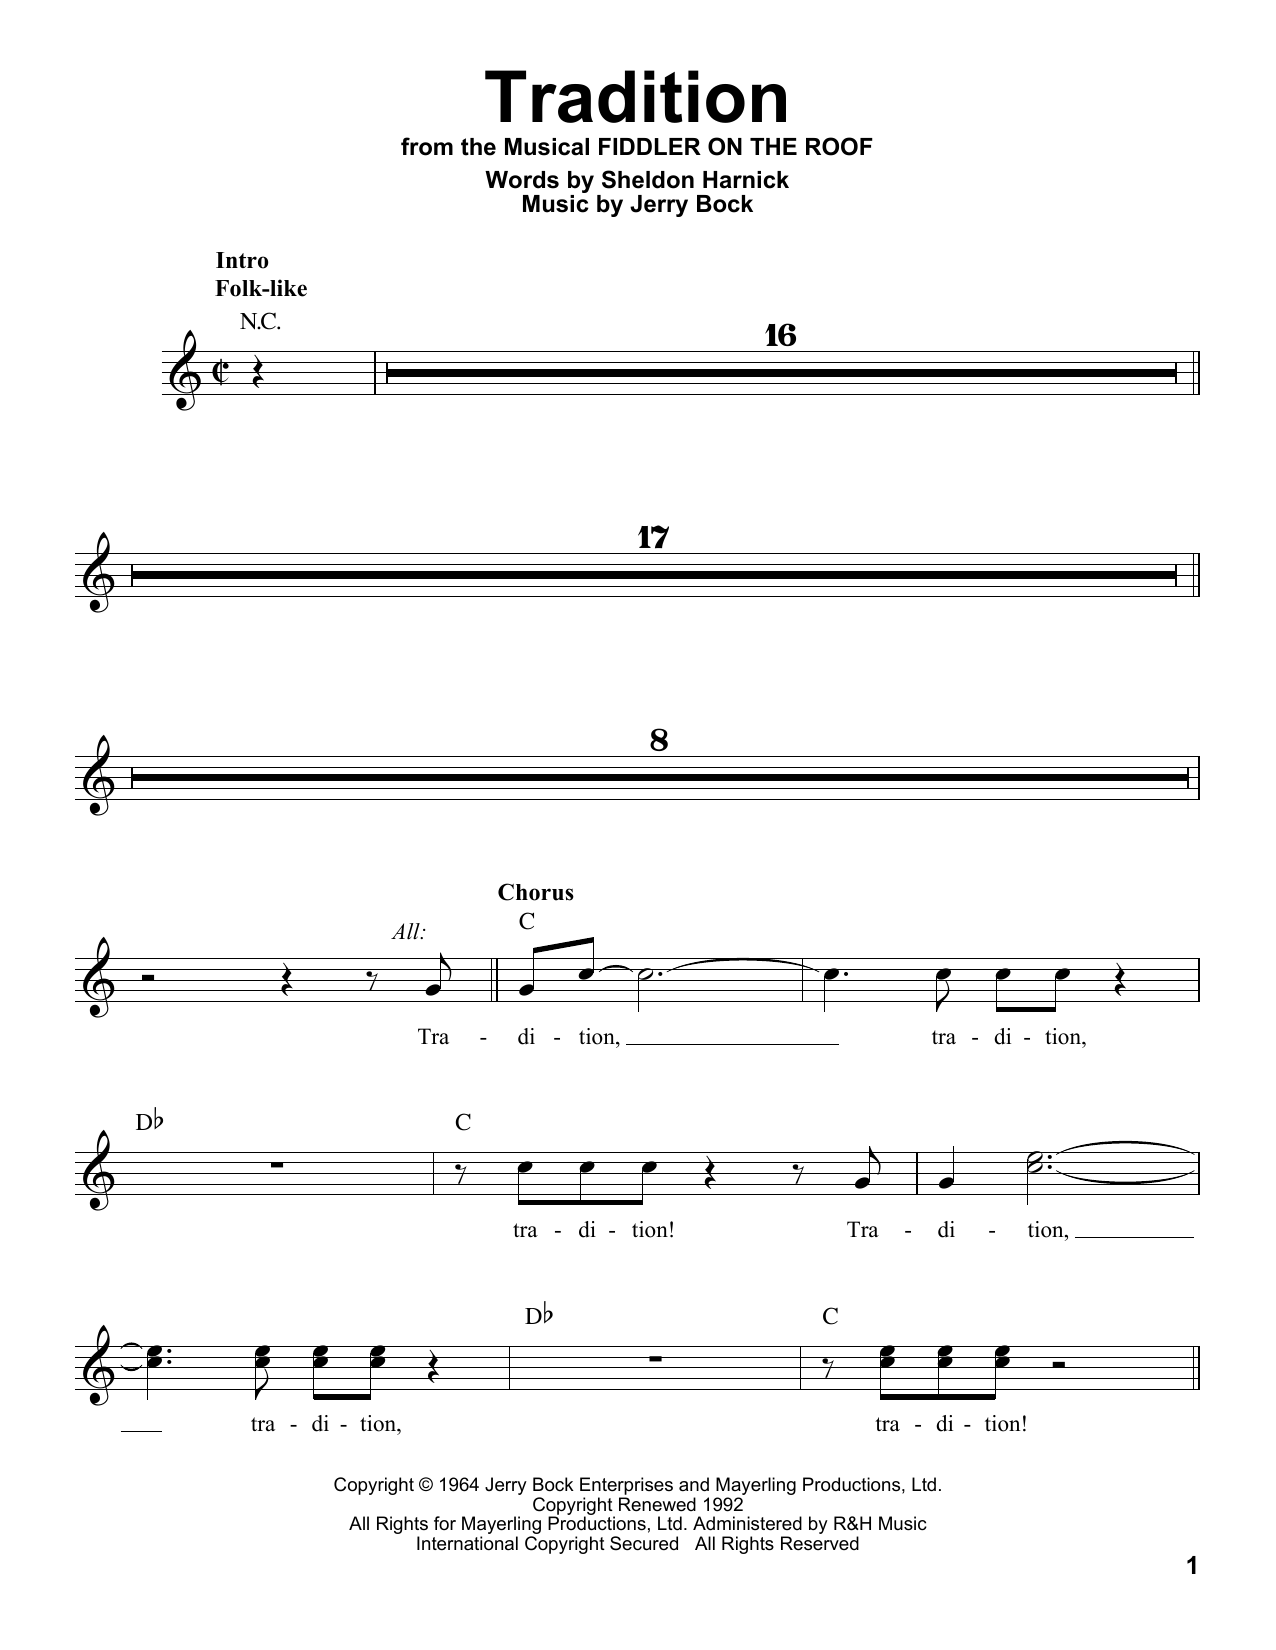 Sheldon Harnick Tradition sheet music notes and chords. Download Printable PDF.